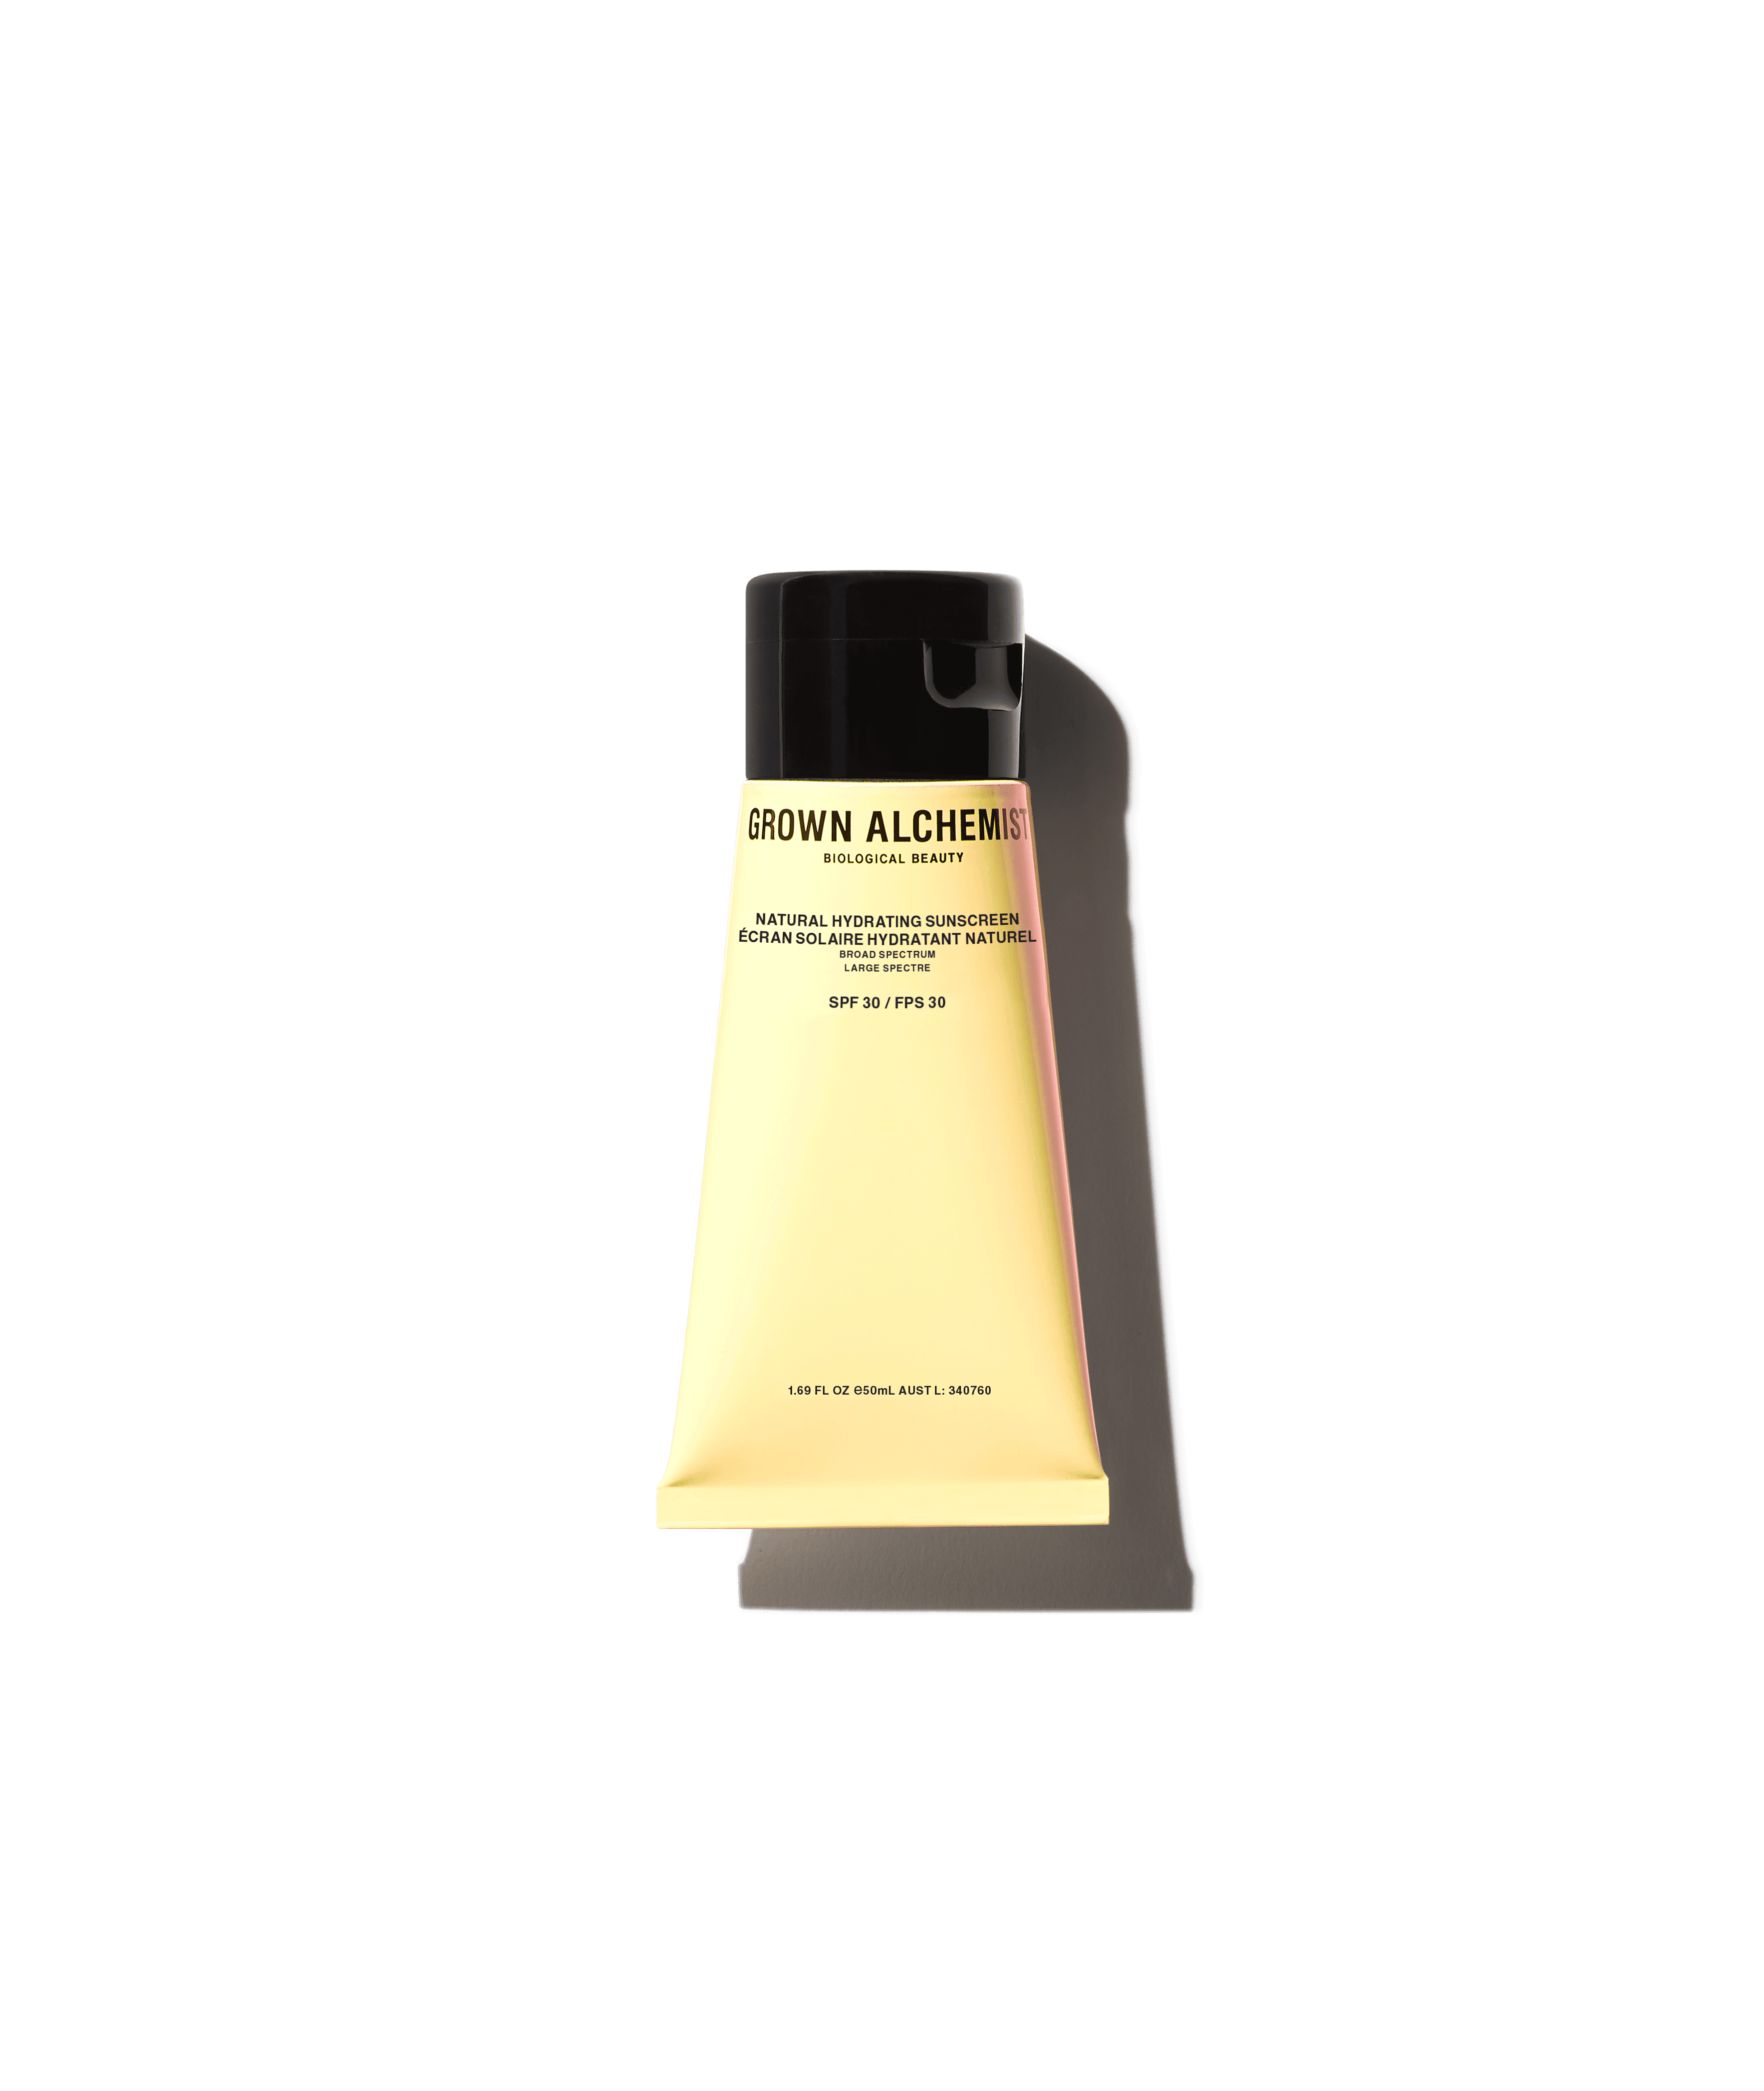 Natural Hydrating Sunscreen Broad Spectrum SPF-30